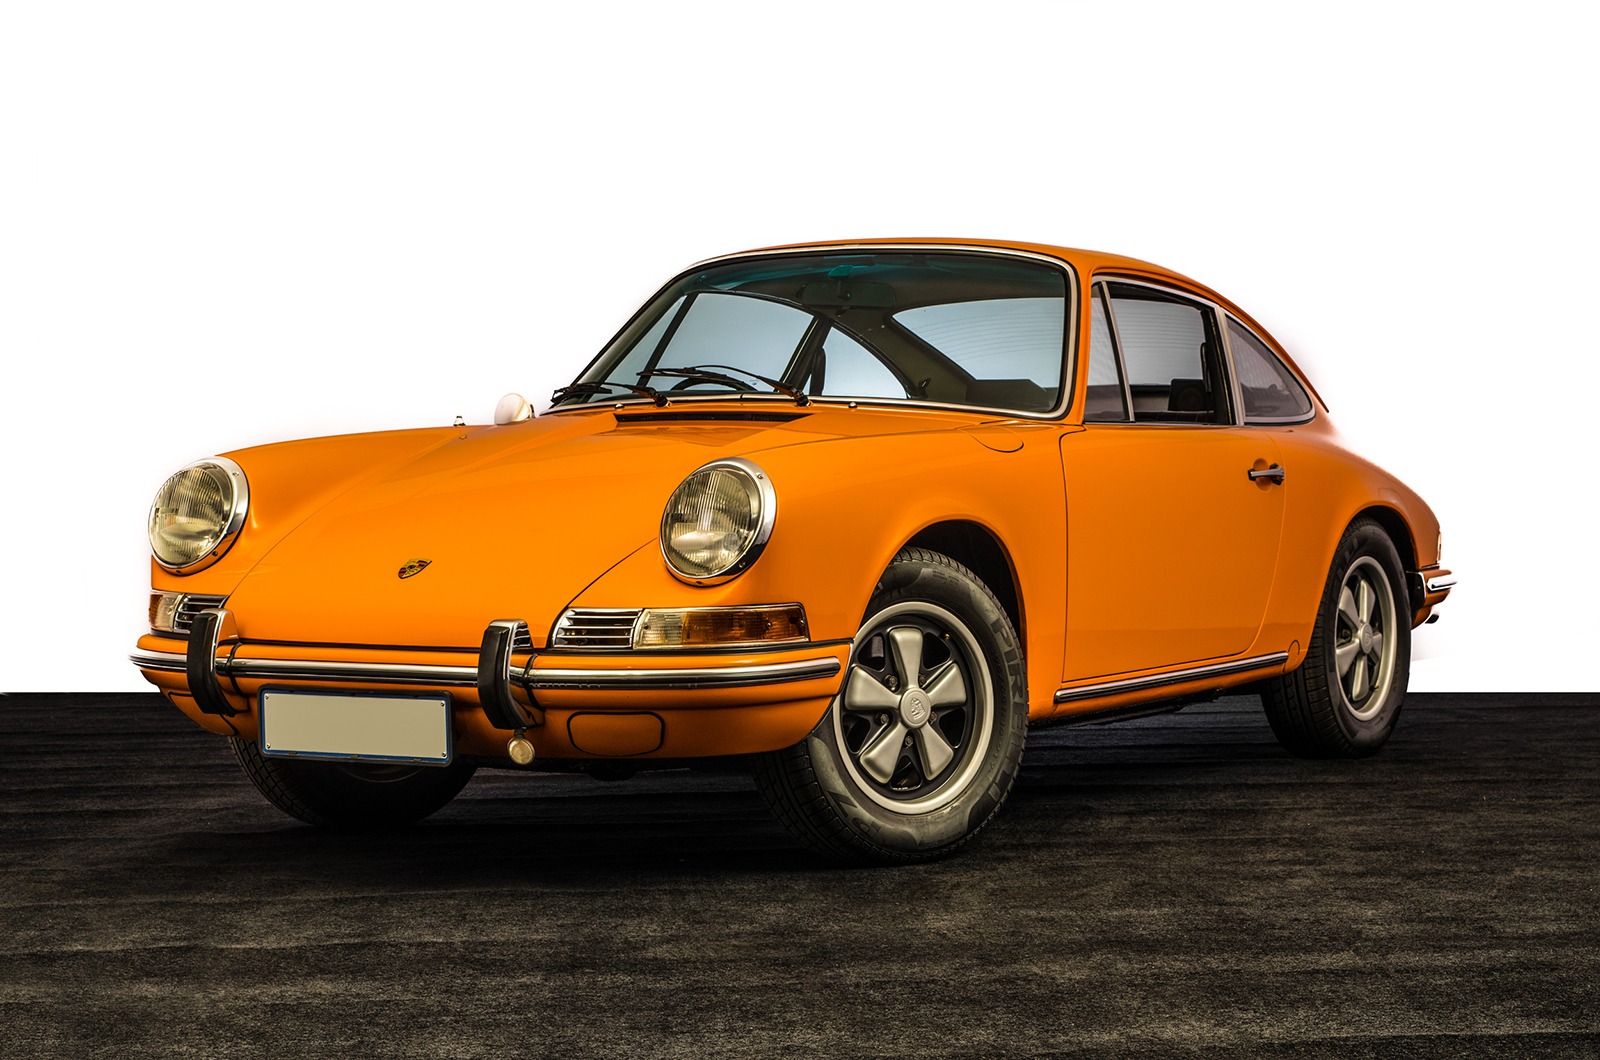 Classic & Sports Car – Classics set to sparkle in African sale